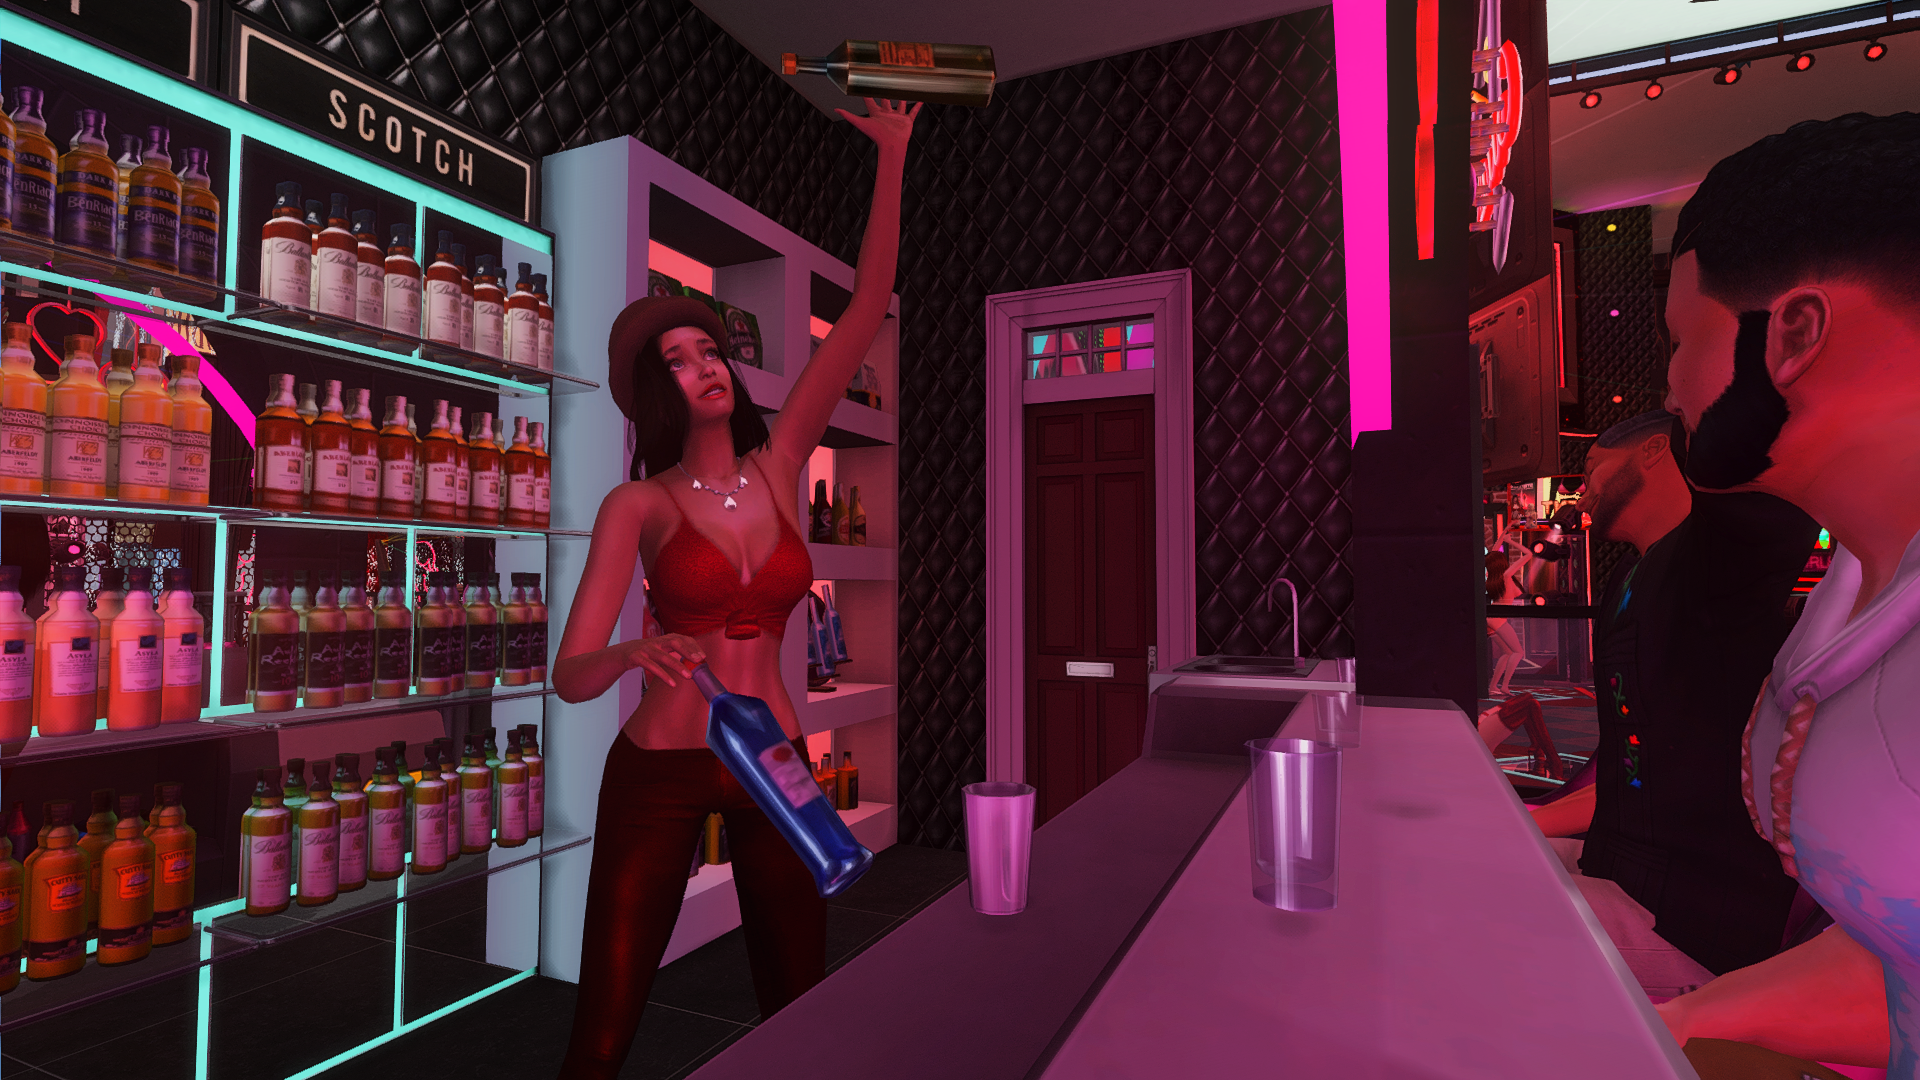 Discussion On Sims4 Strip Club The Succubus Wickedwhims Loverslab